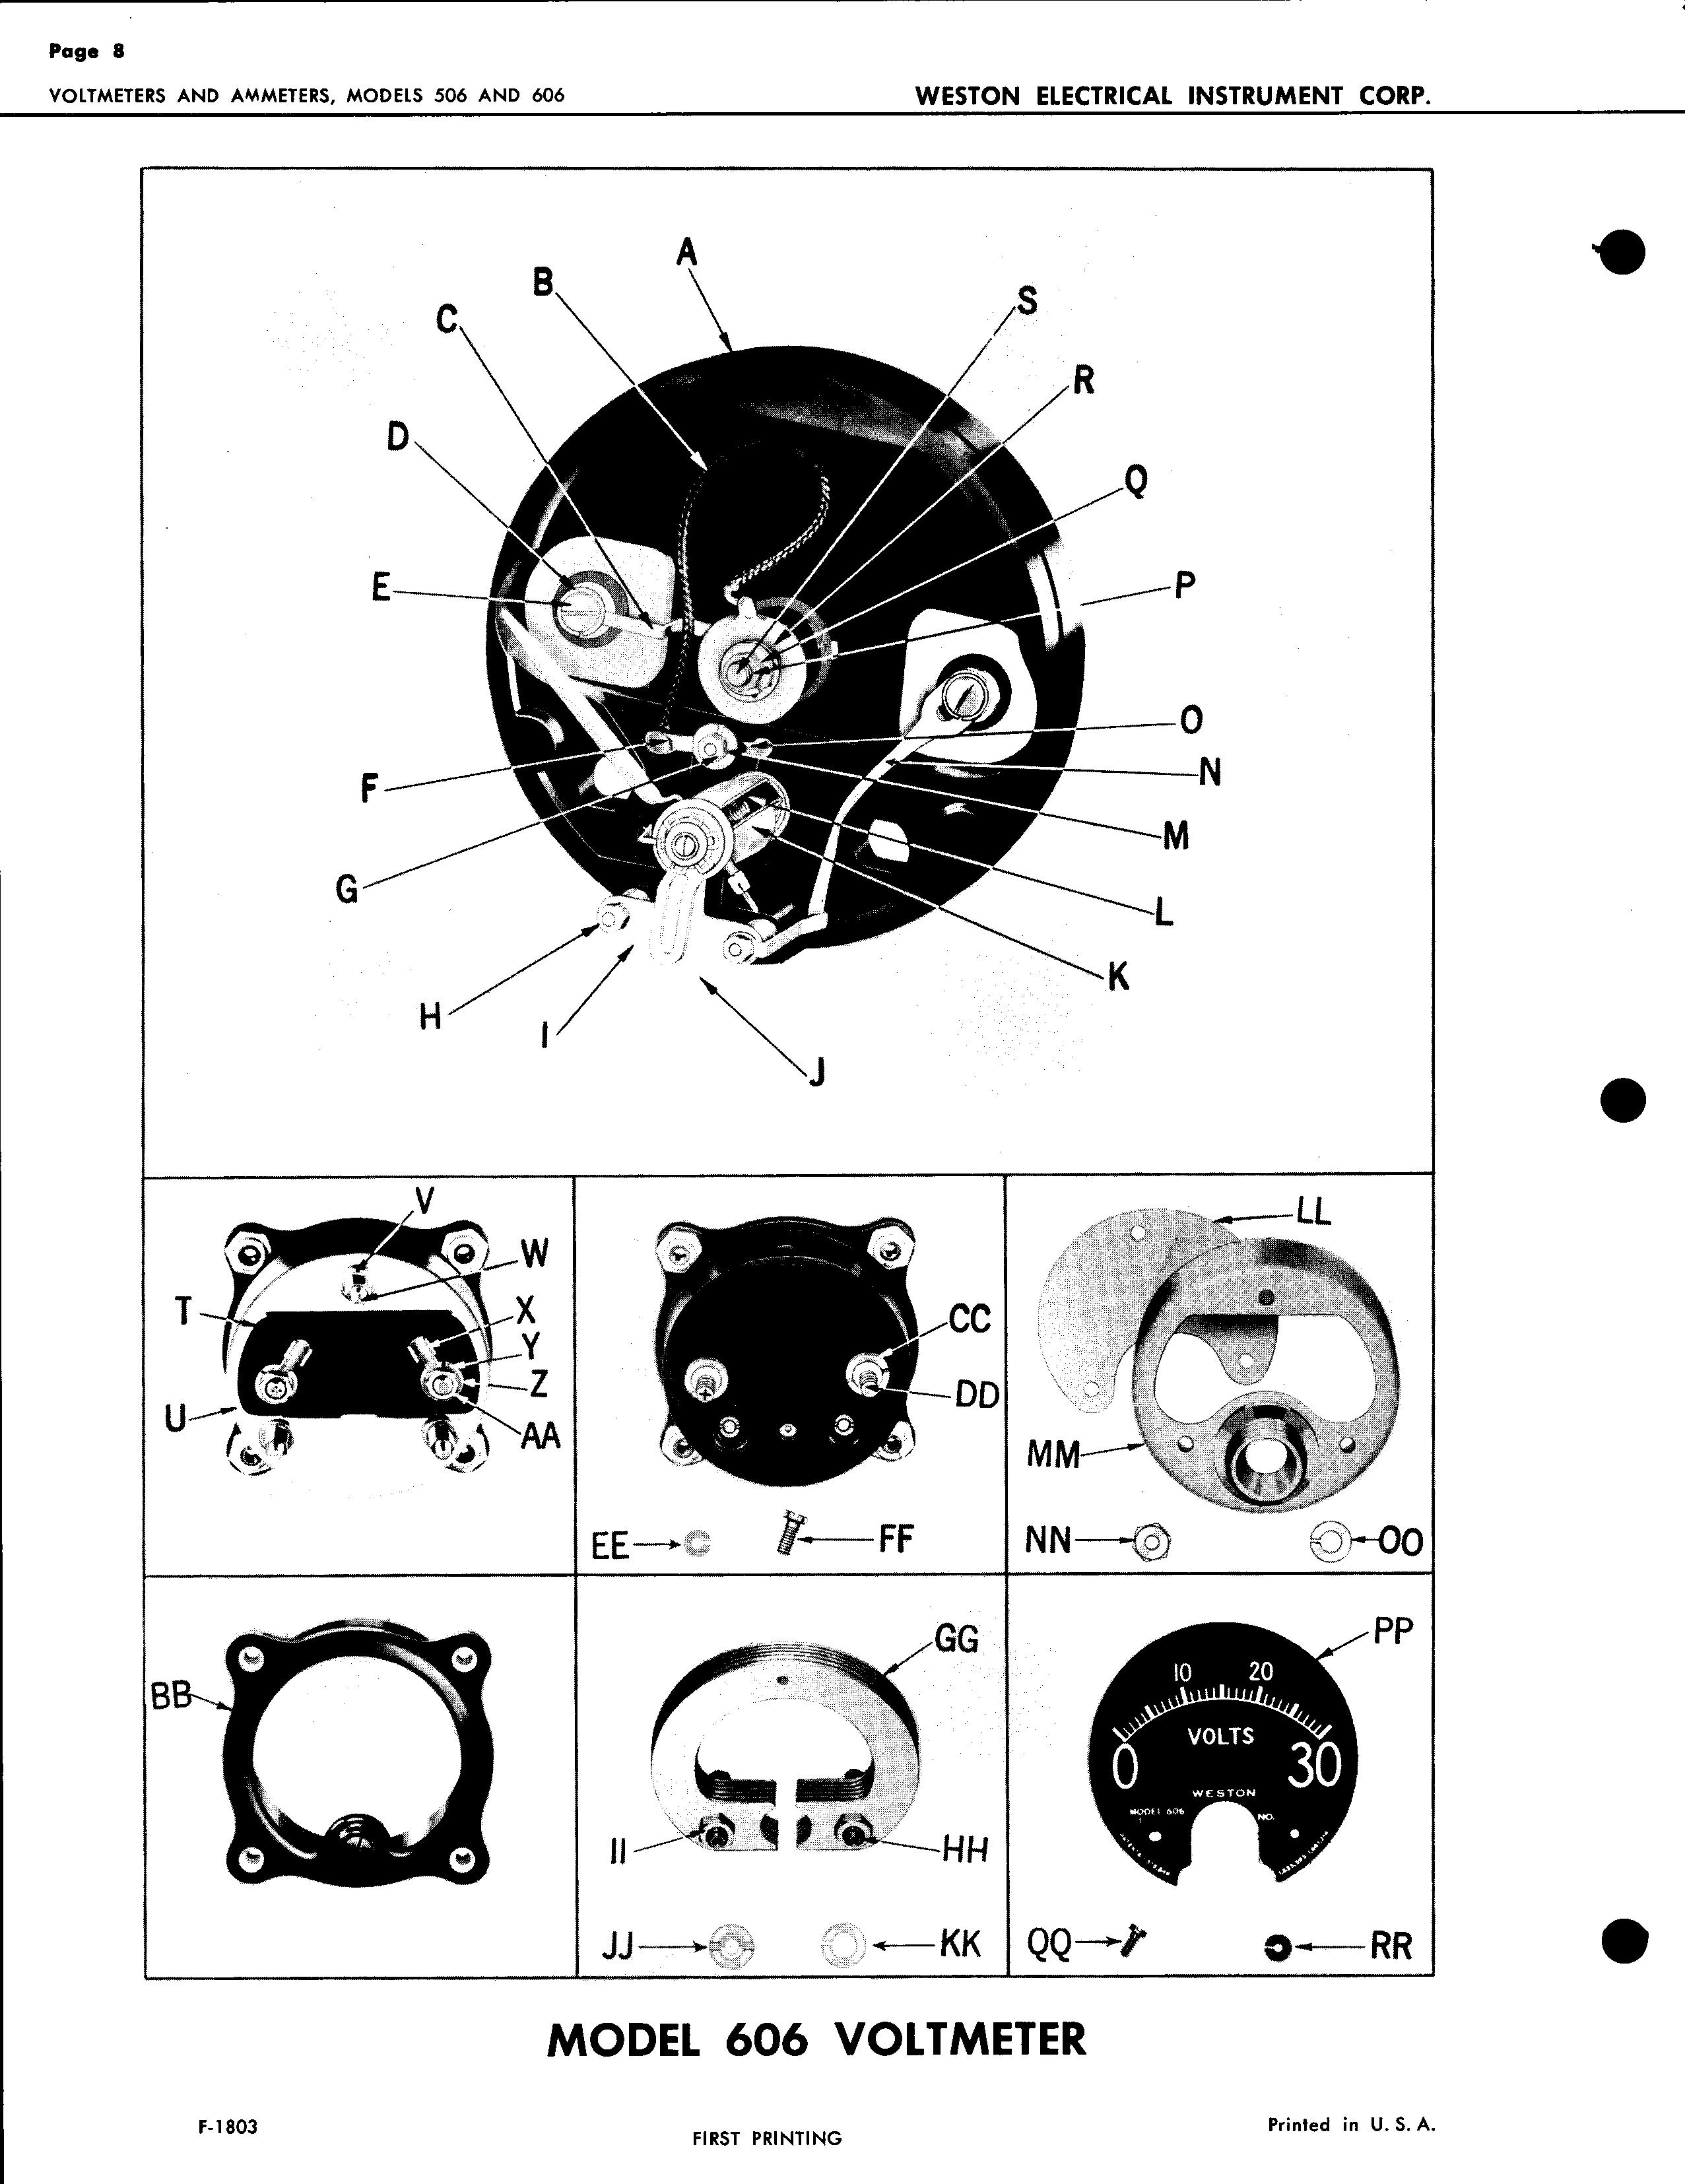 Sample page 8 from AirCorps Library document: Service Instructions for Models 506 & 606 Voltmeters and Ammeters